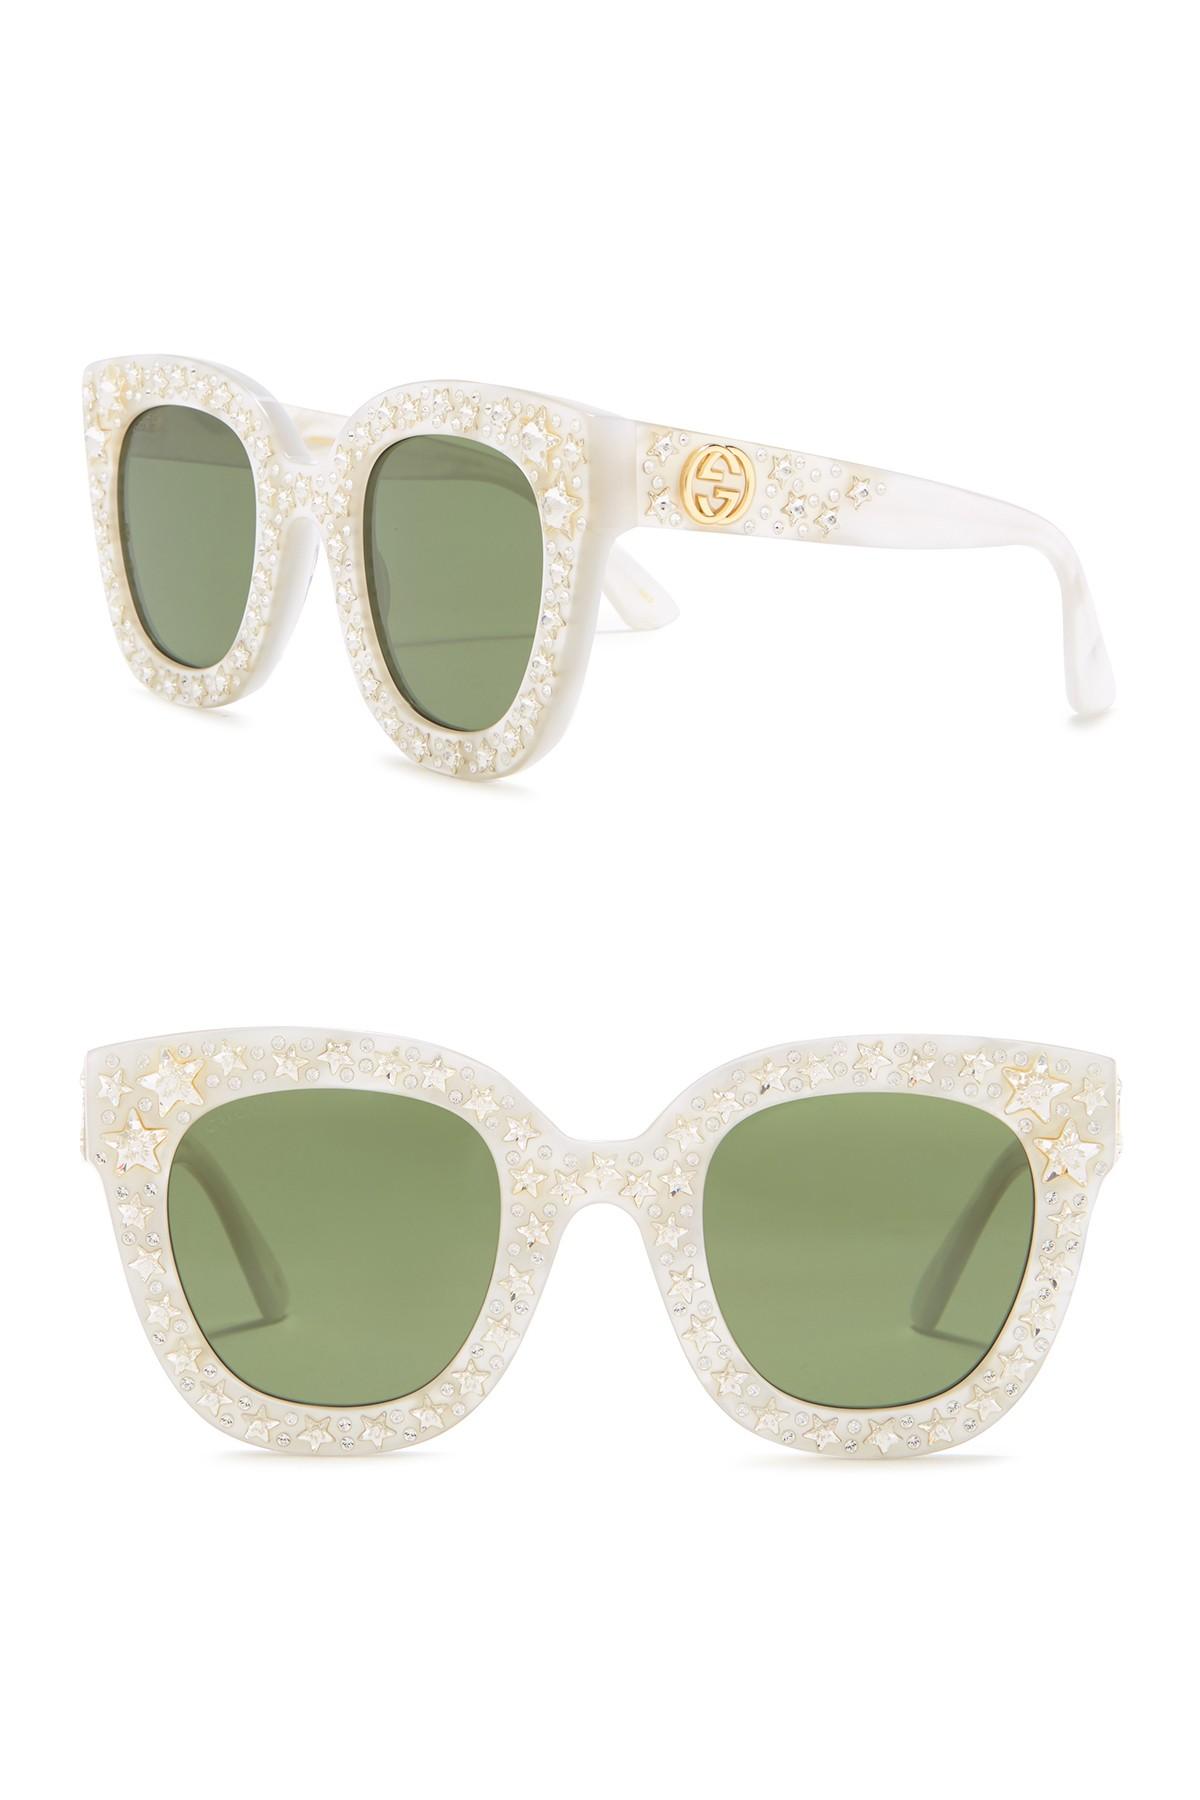 Gucci 49mm Crystal Star Sunglasses in White | Lyst